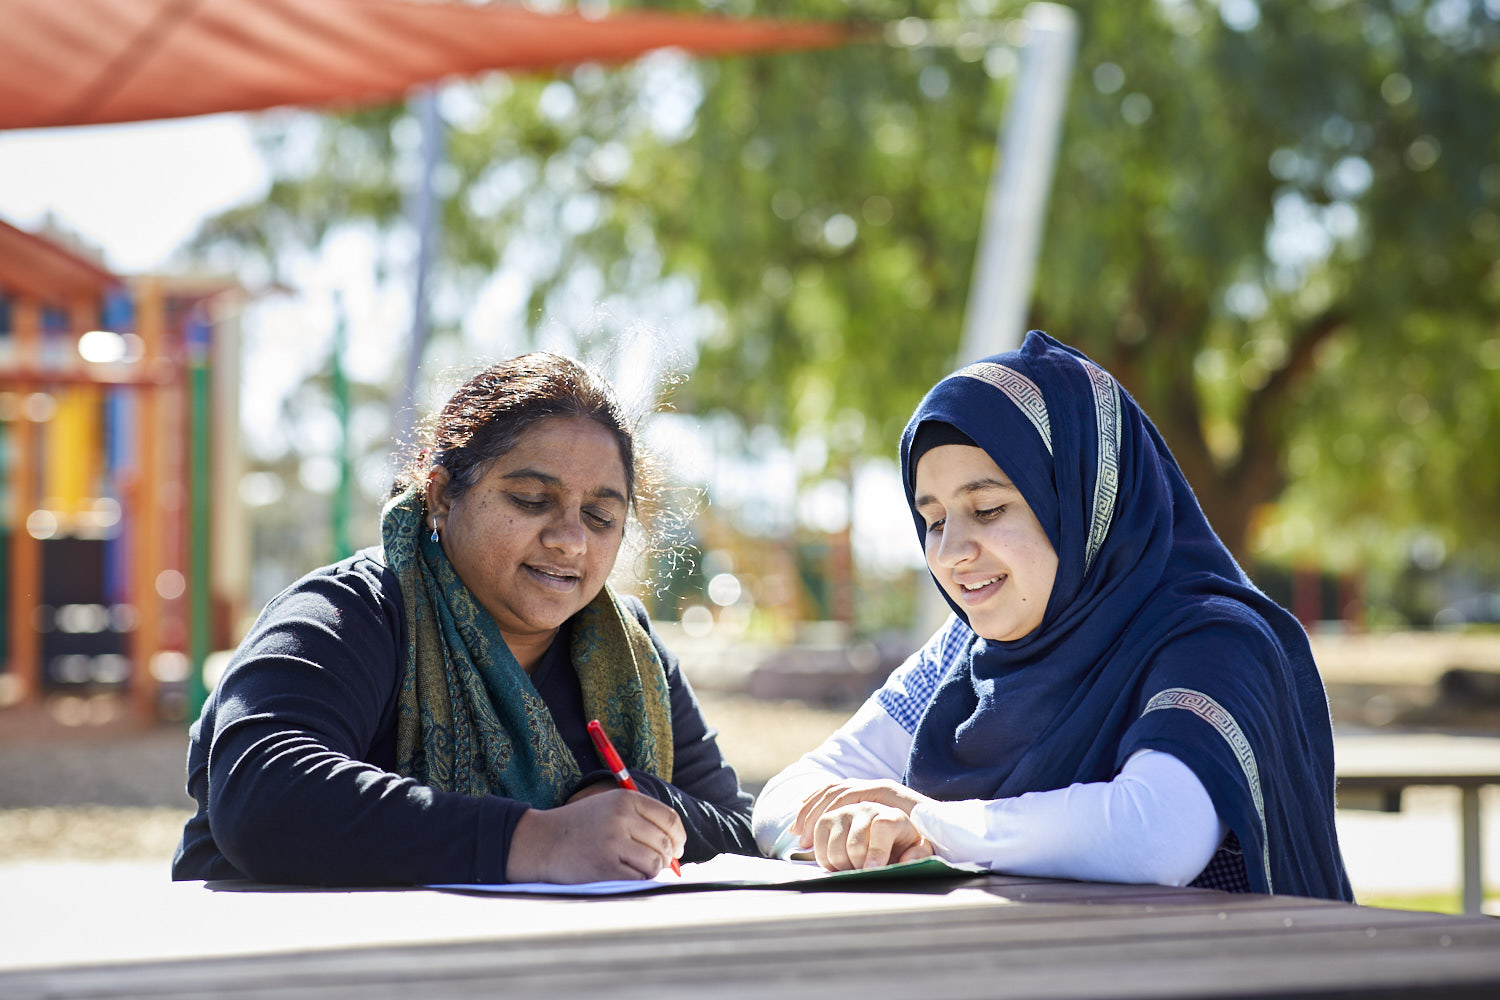 An educator and a student sit at a table outdoors with a playground in the background.